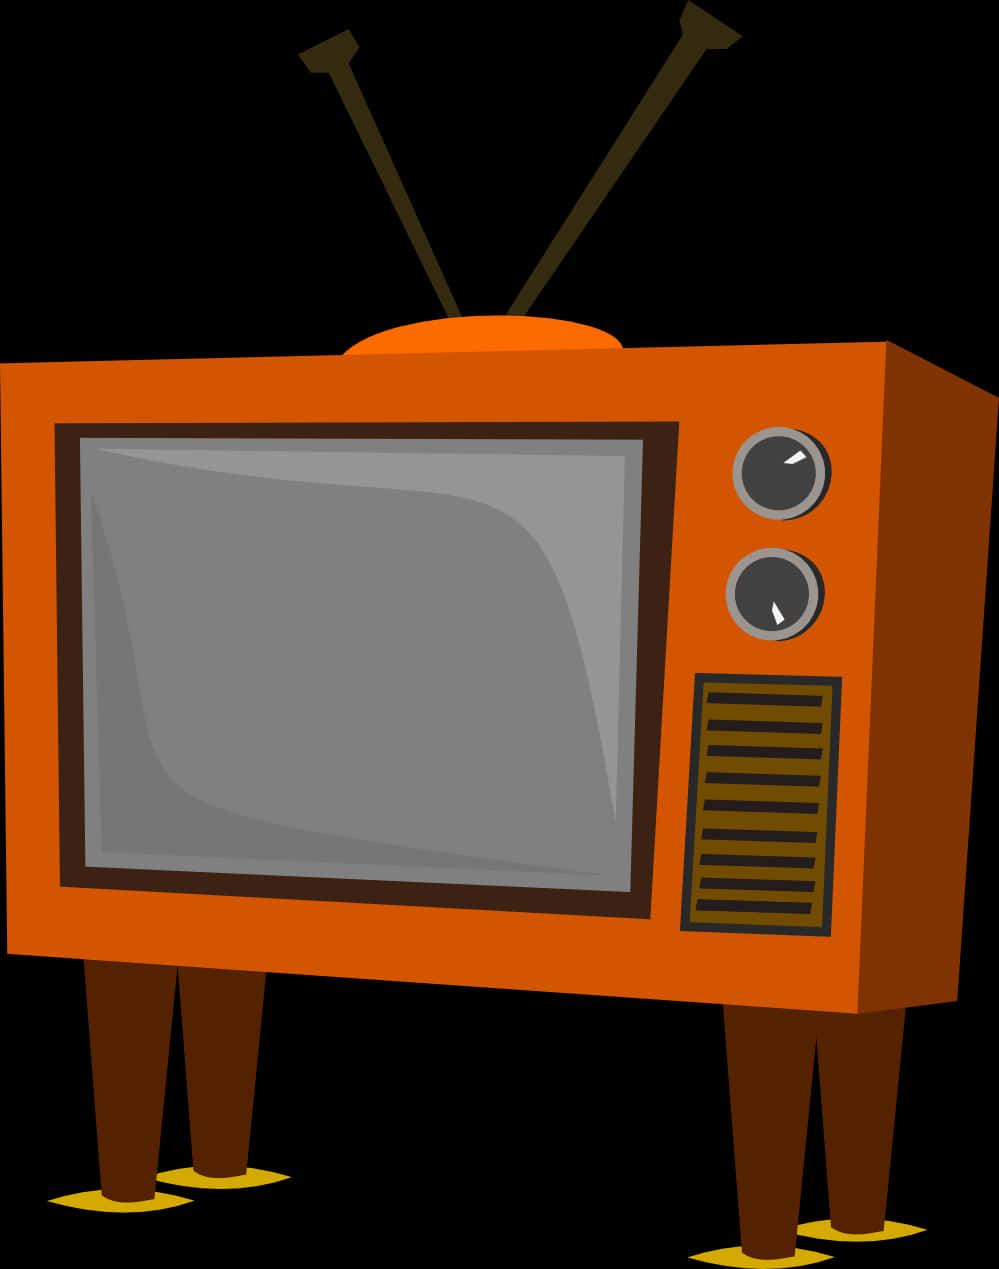 An Orange Television With Two Antenna